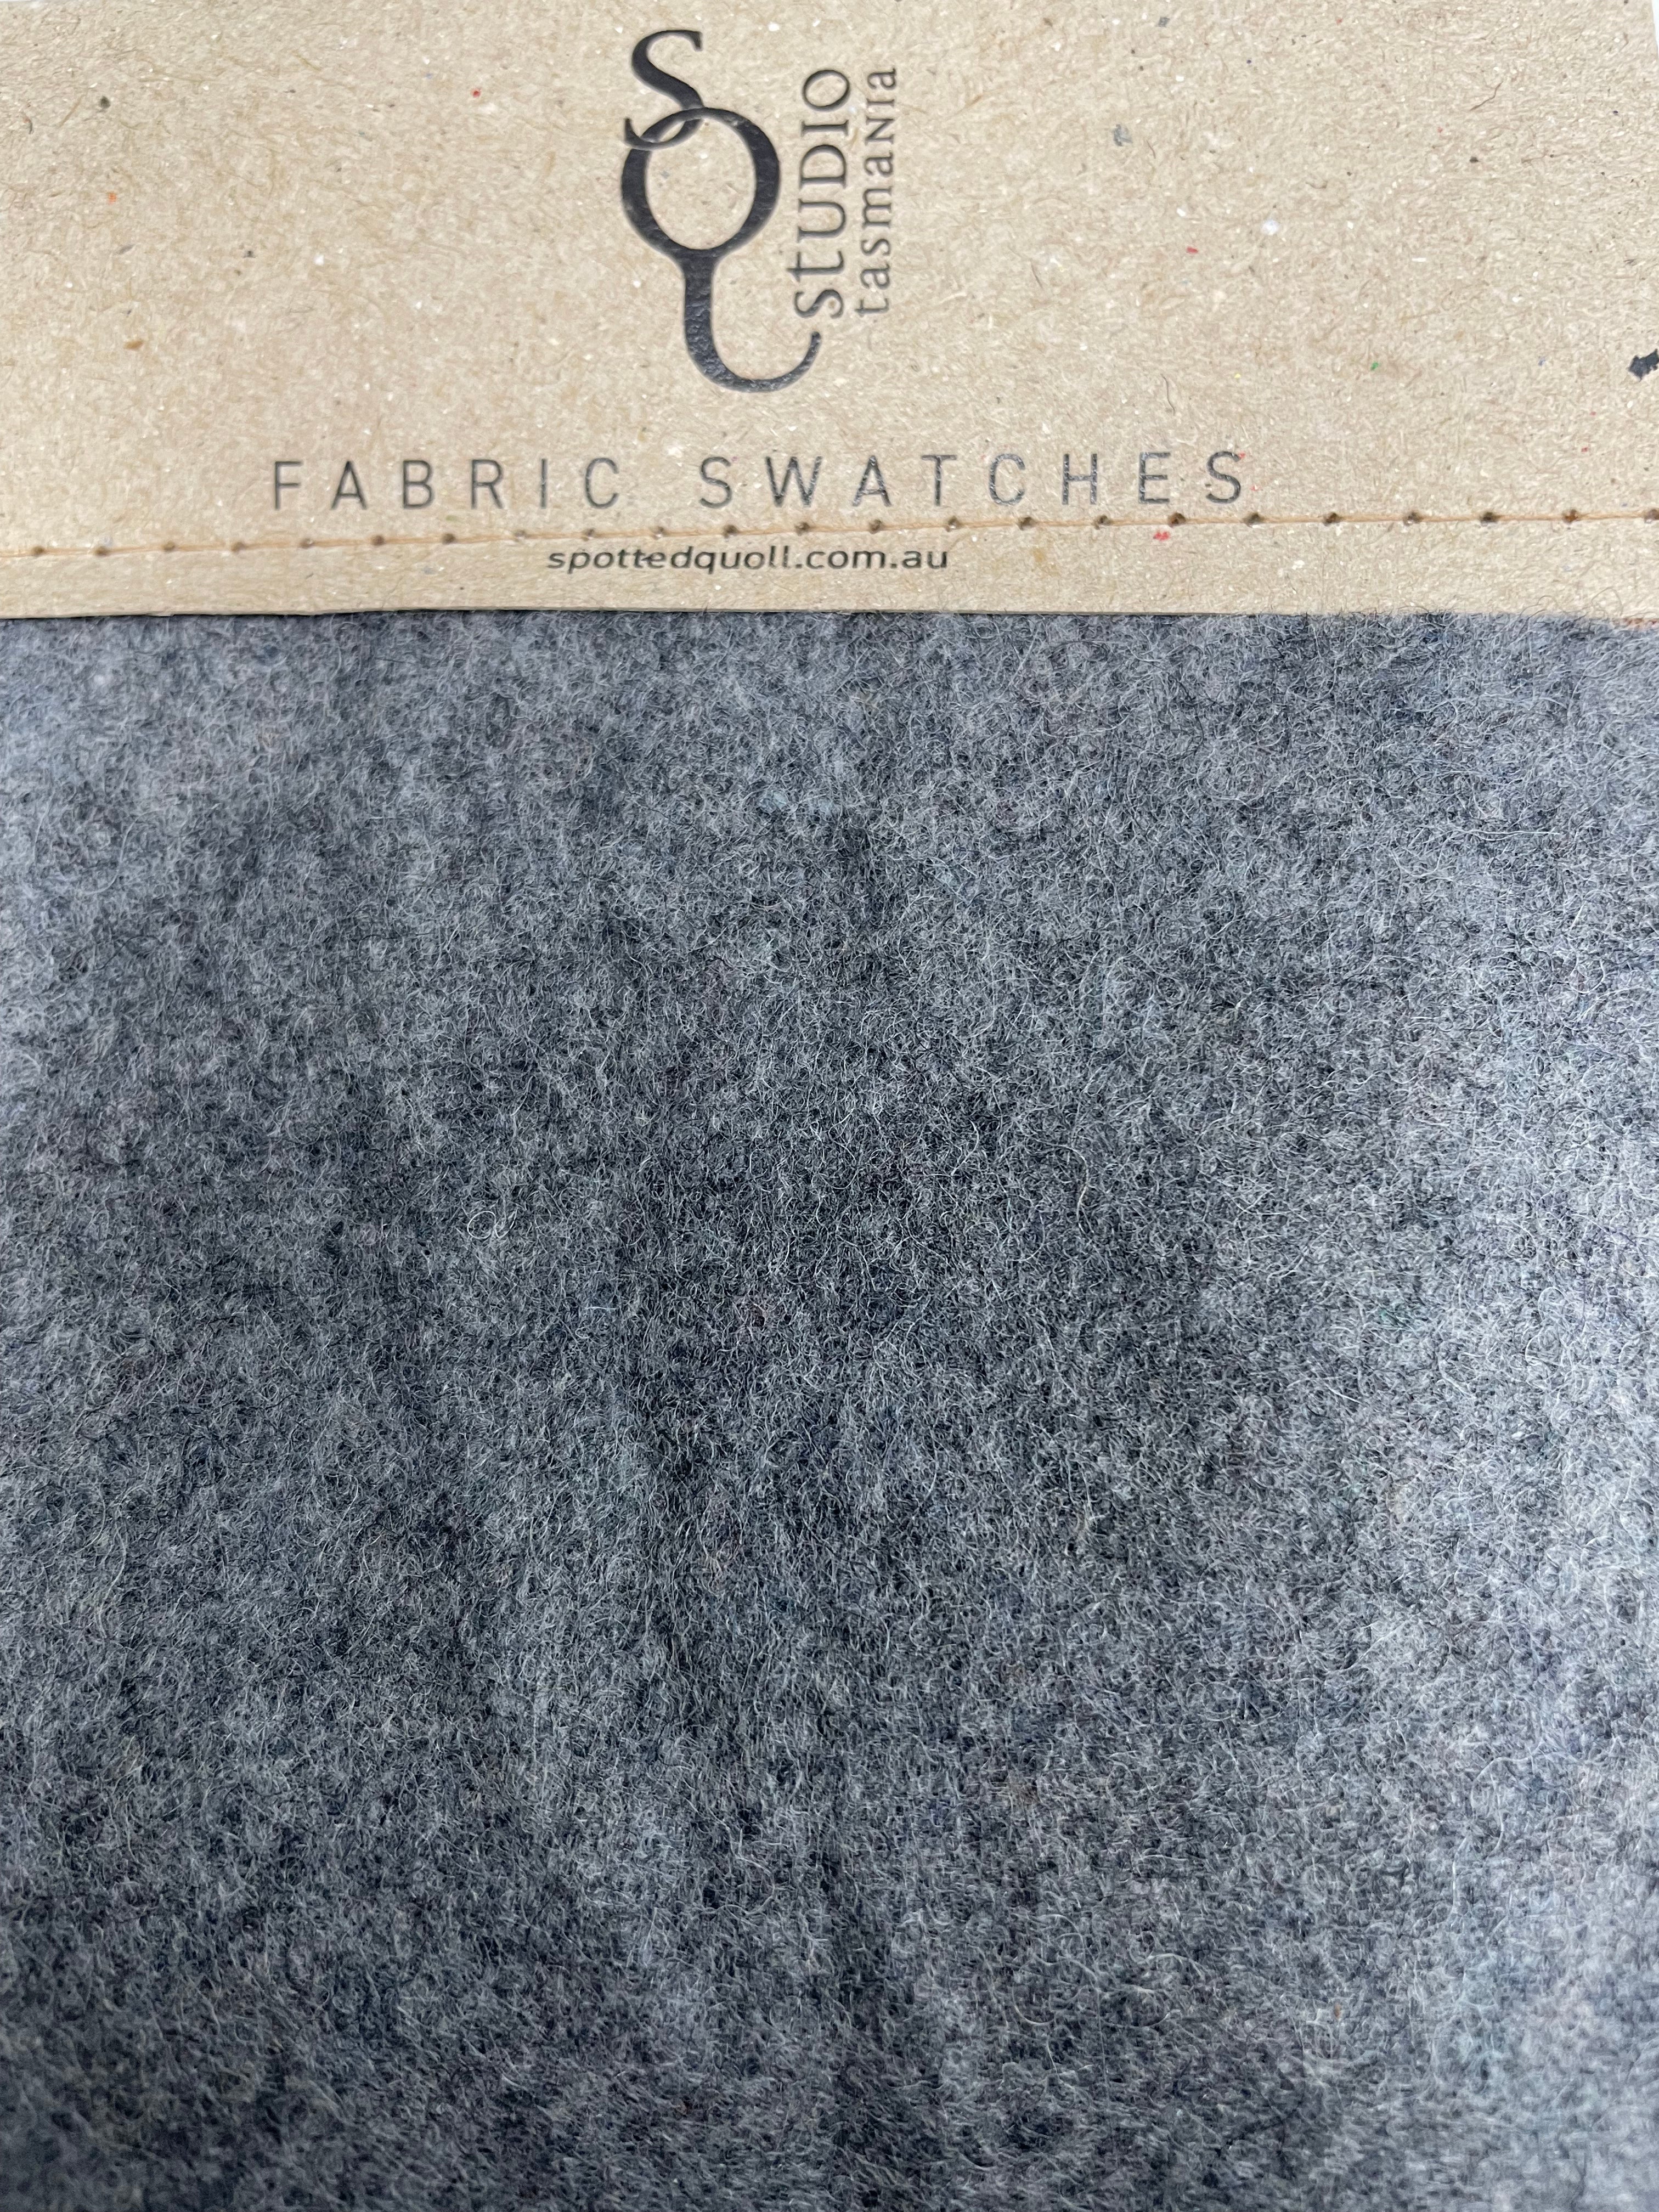 Organic Felt Wool by the metre fabric The Spotted Quoll Studio 1 x Free Swatch Pack All Kinds 